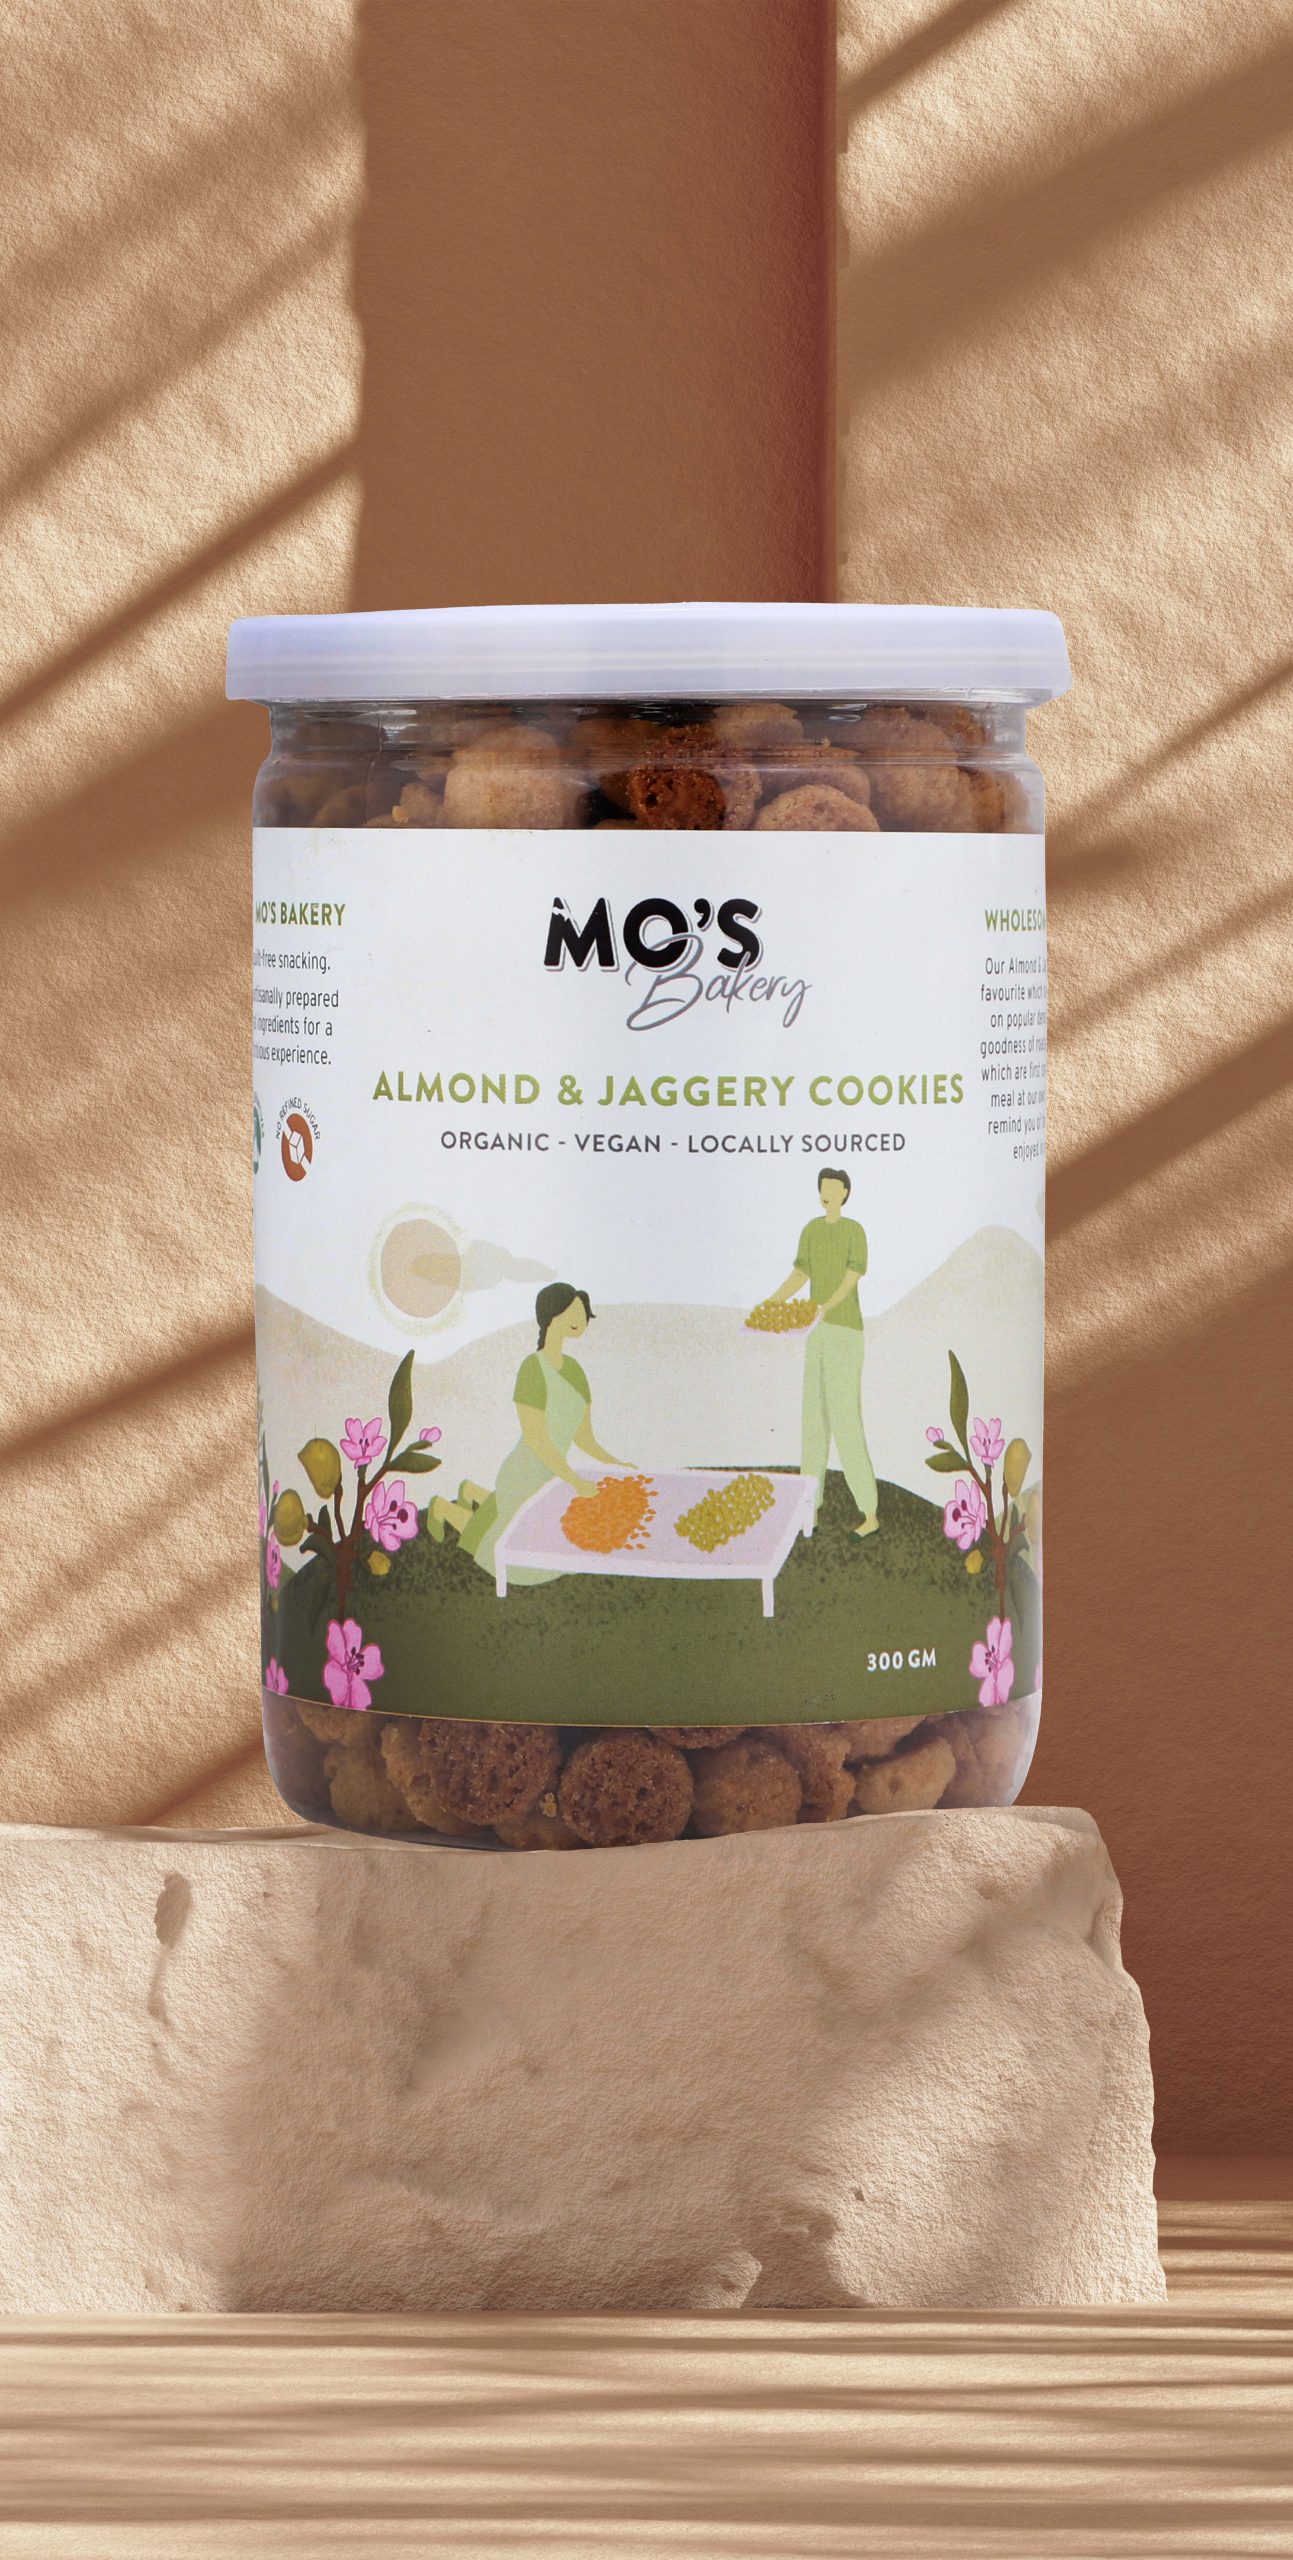 Product: Mo’s Bakery Almond Jaggery Cookies